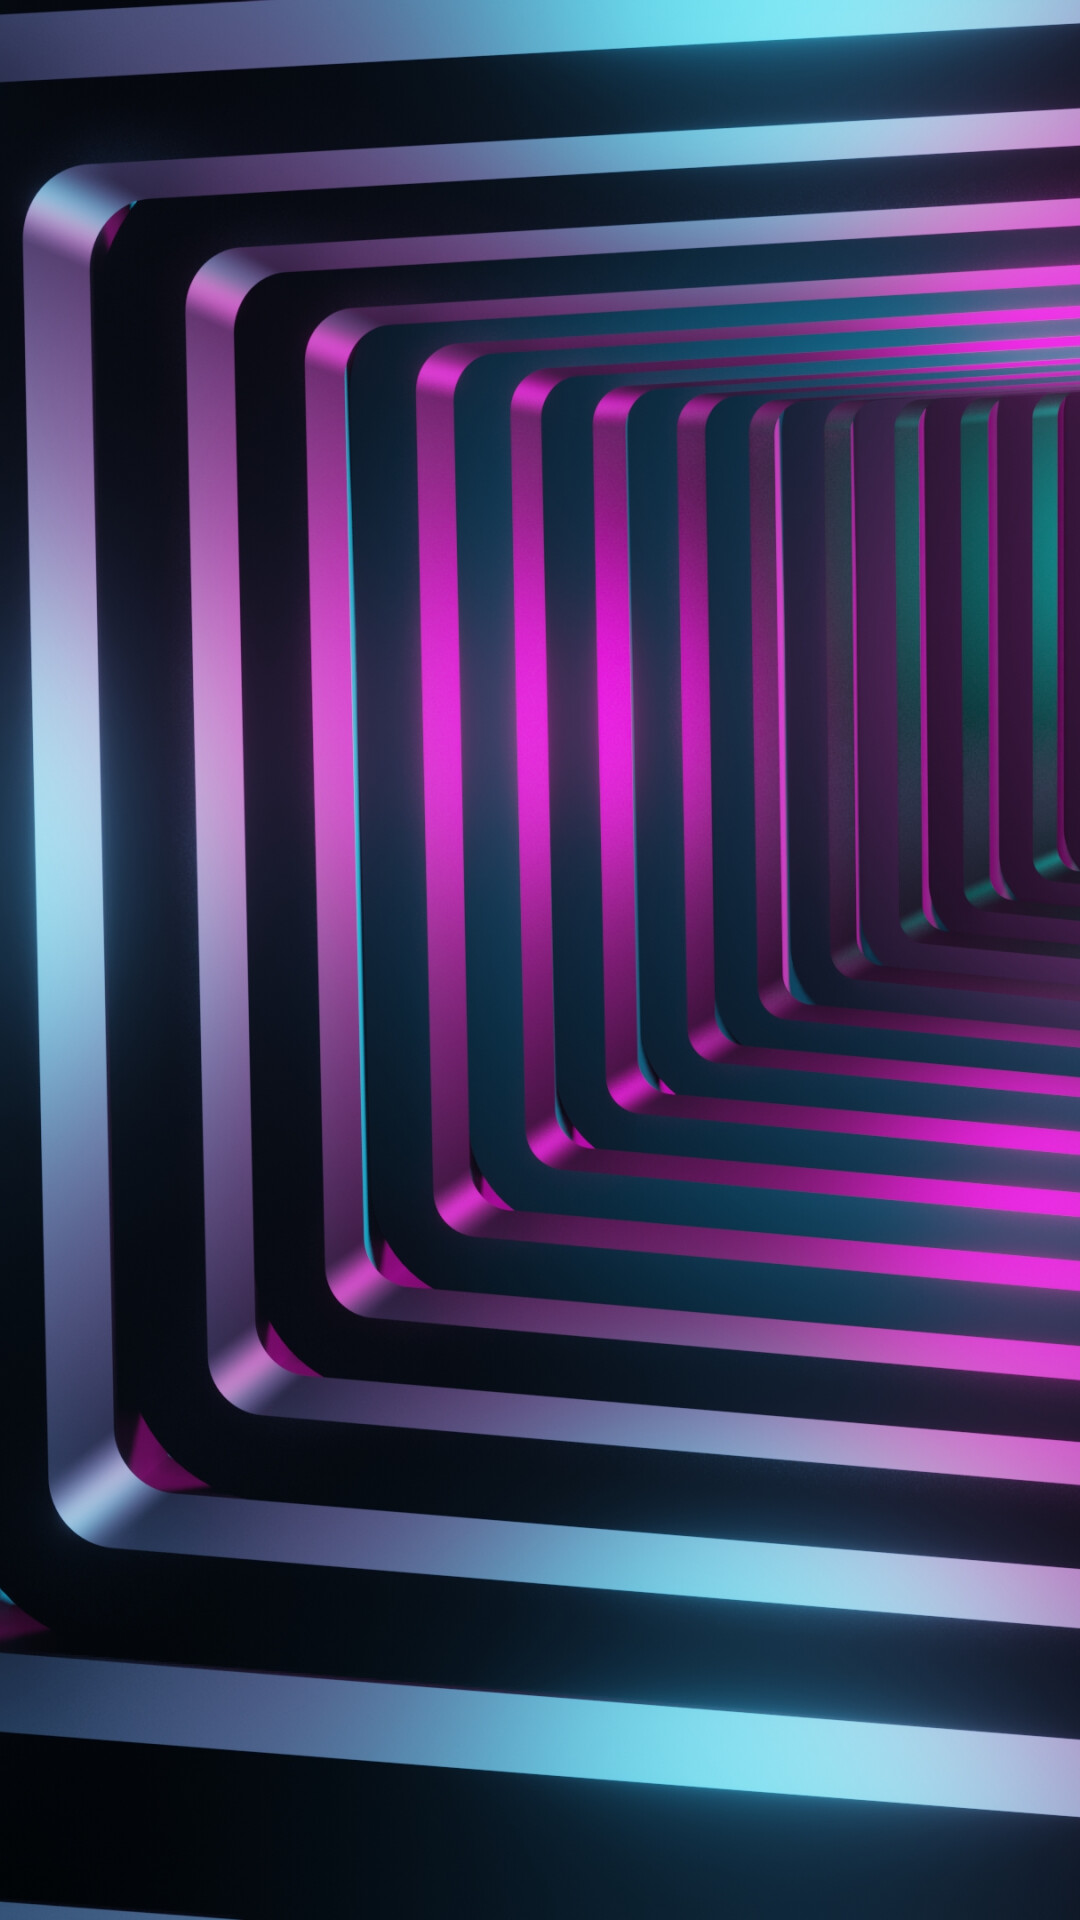 Glow in the Dark: Rectangle tunnel, Neon lighting, Infinite square tunnel. 1080x1920 Full HD Background.